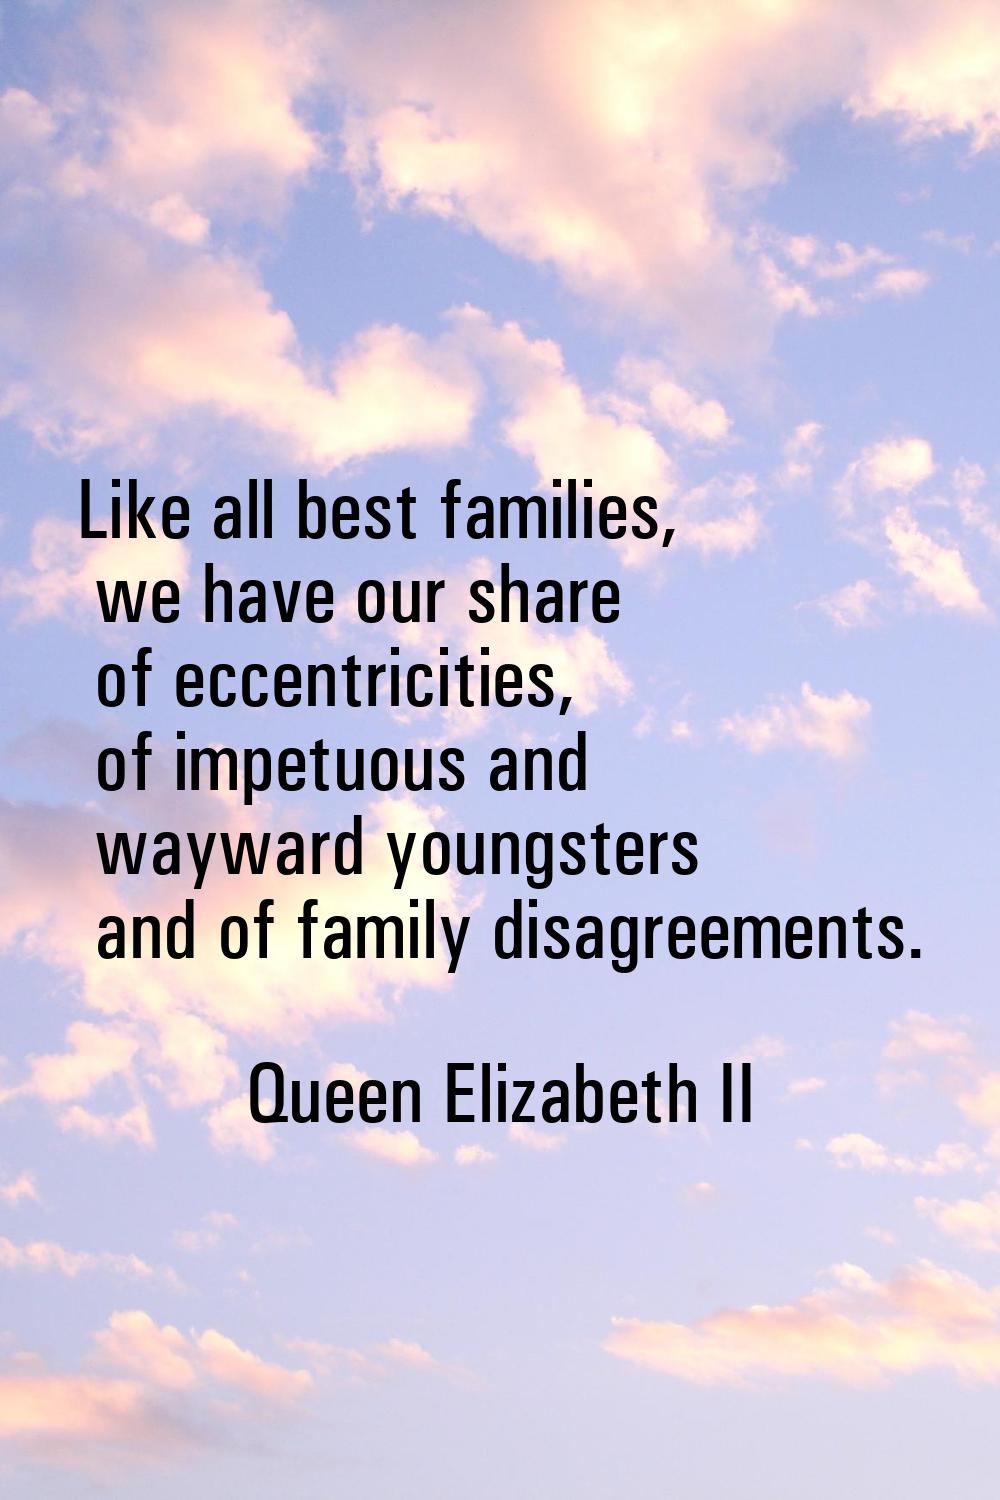 Like all best families, we have our share of eccentricities, of impetuous and wayward youngsters an